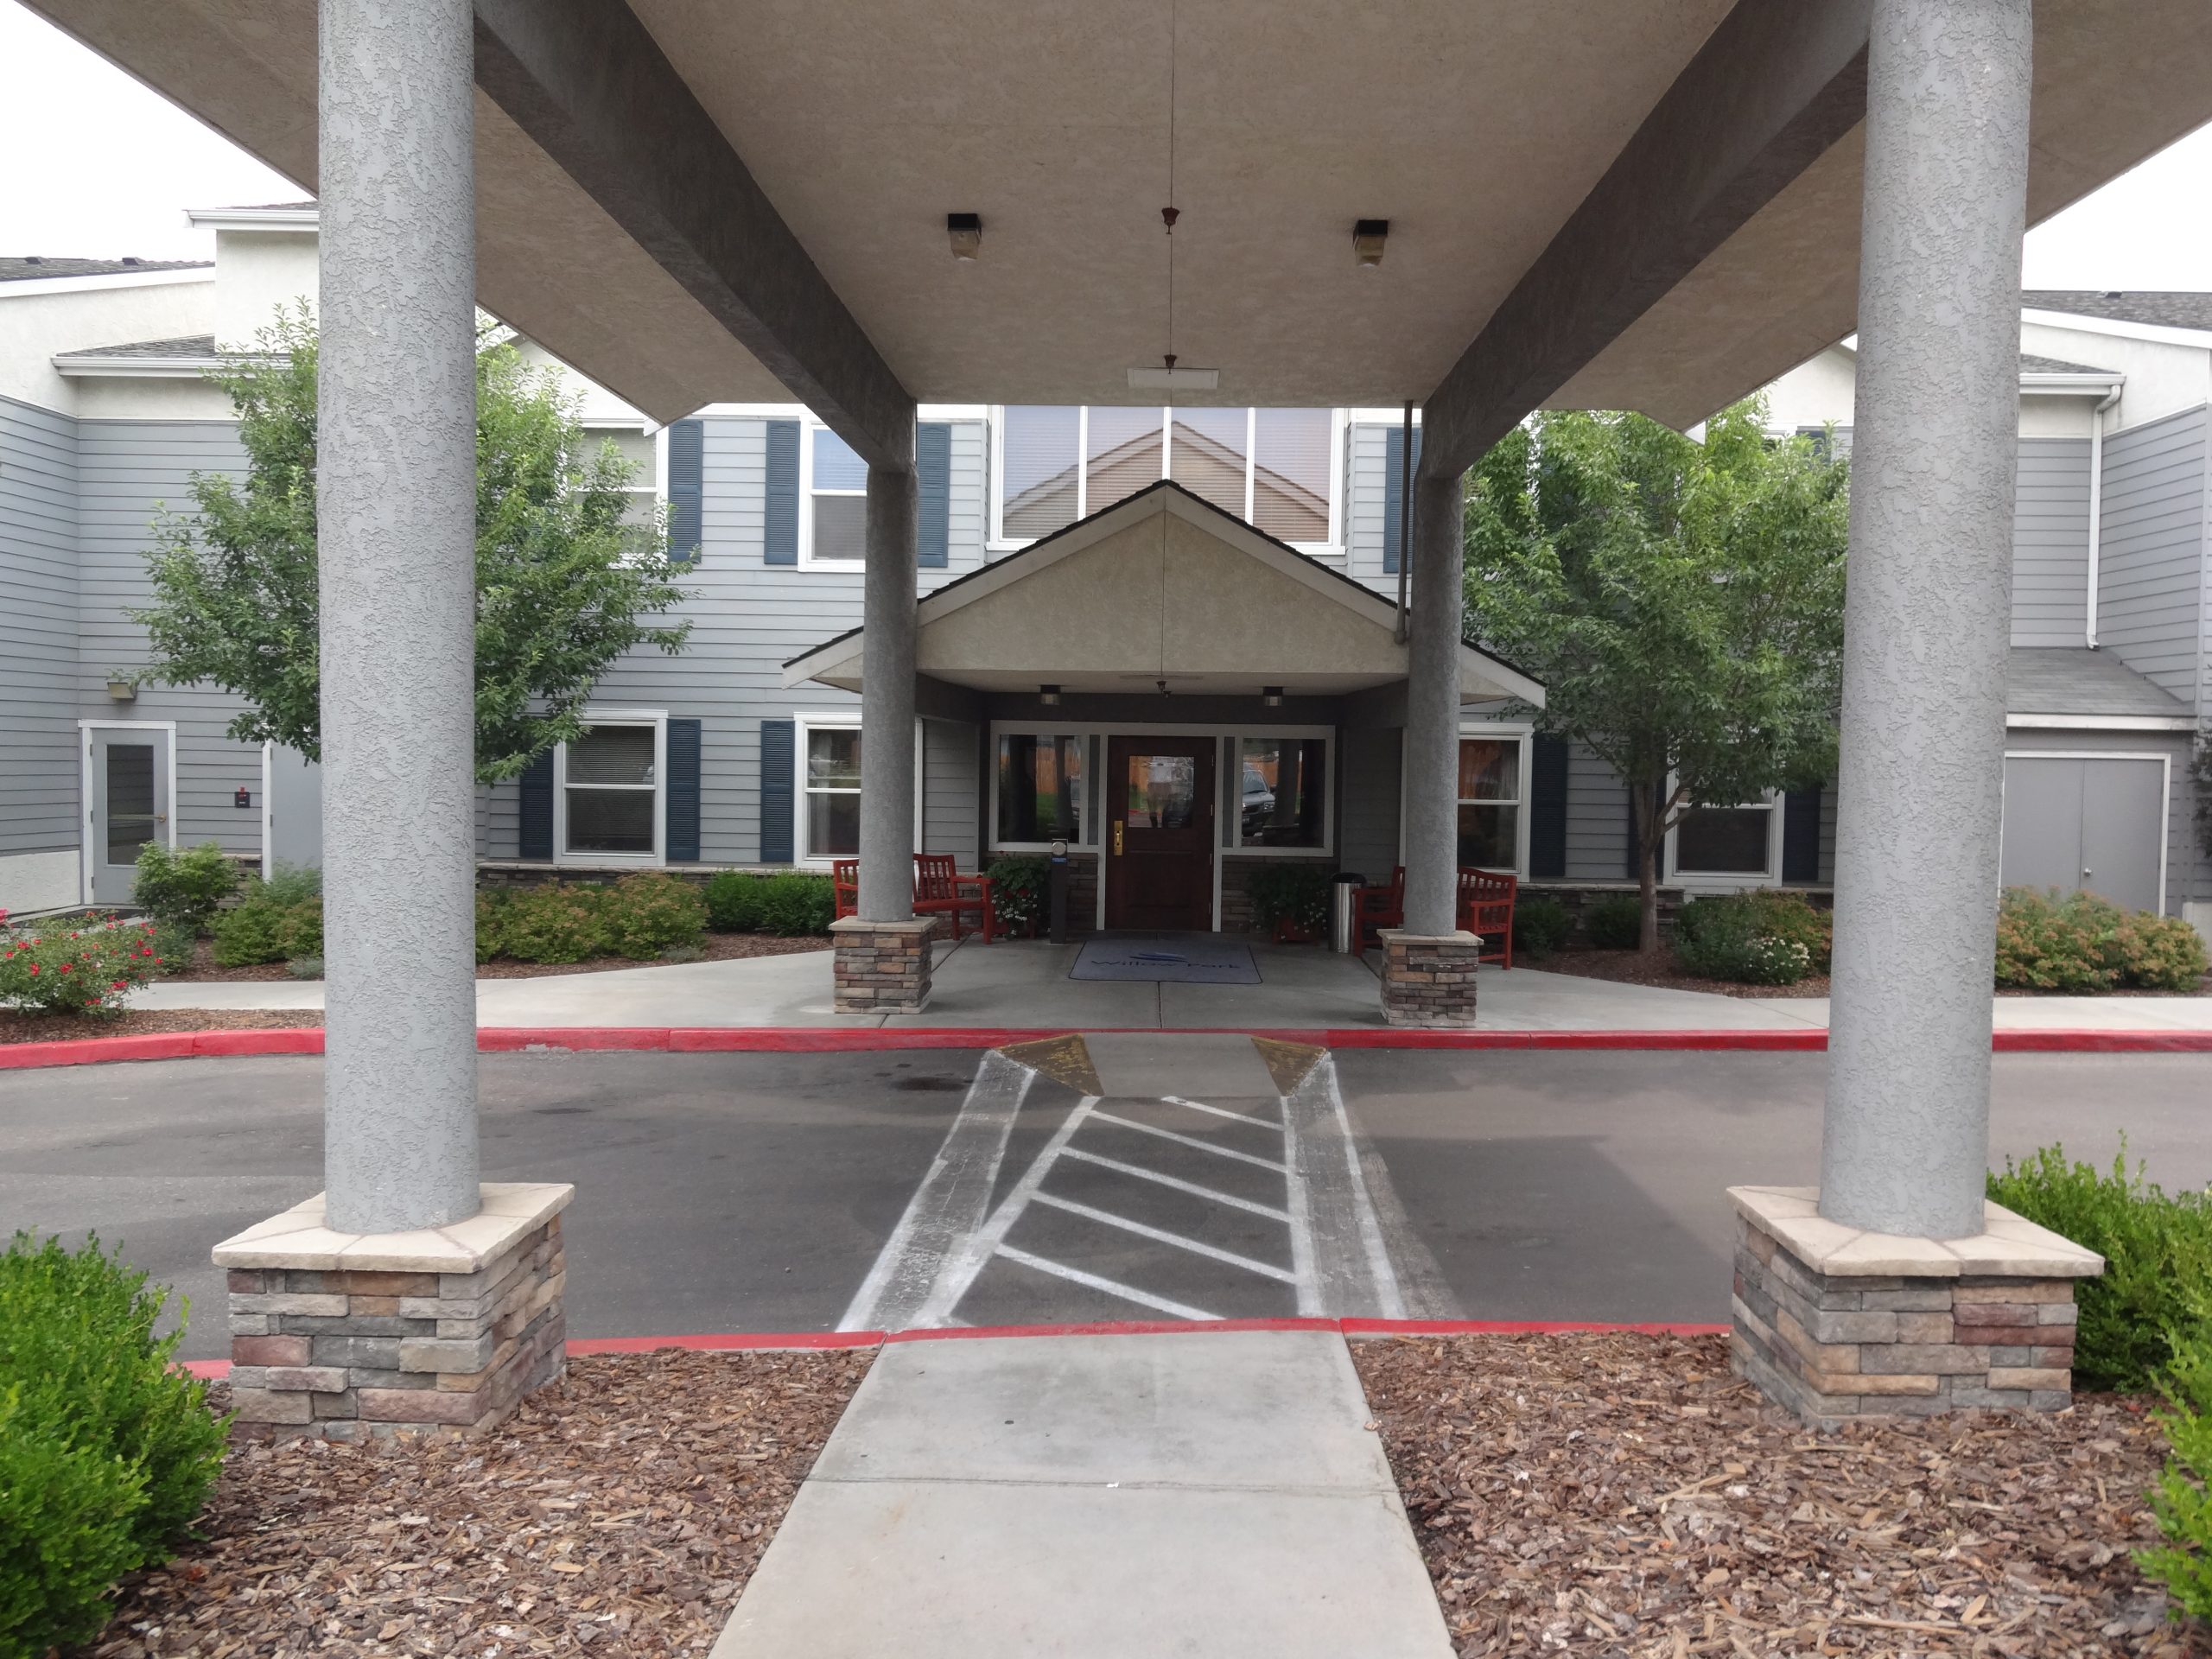 Willow Park Assisted Living